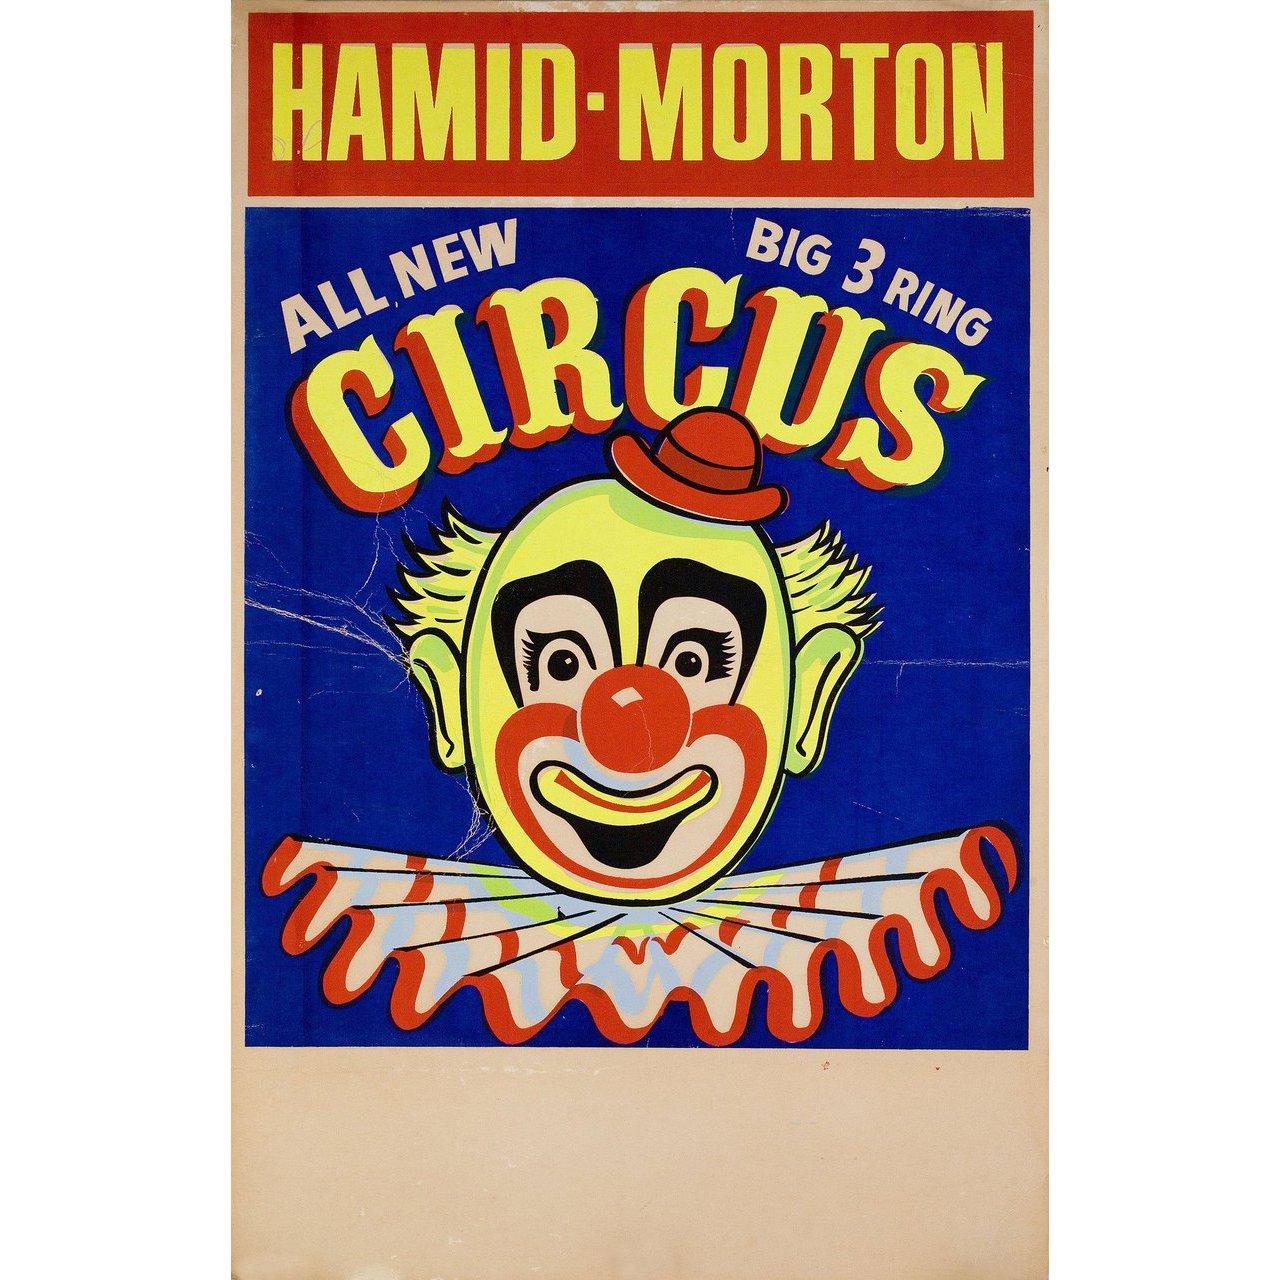 Original 1950s U.S. window card poster for Hamid-Morton Circus (1950s). Very Good-Fine condition, rolled with crease. Please note: the size is stated in inches and the actual size can vary by an inch or more.